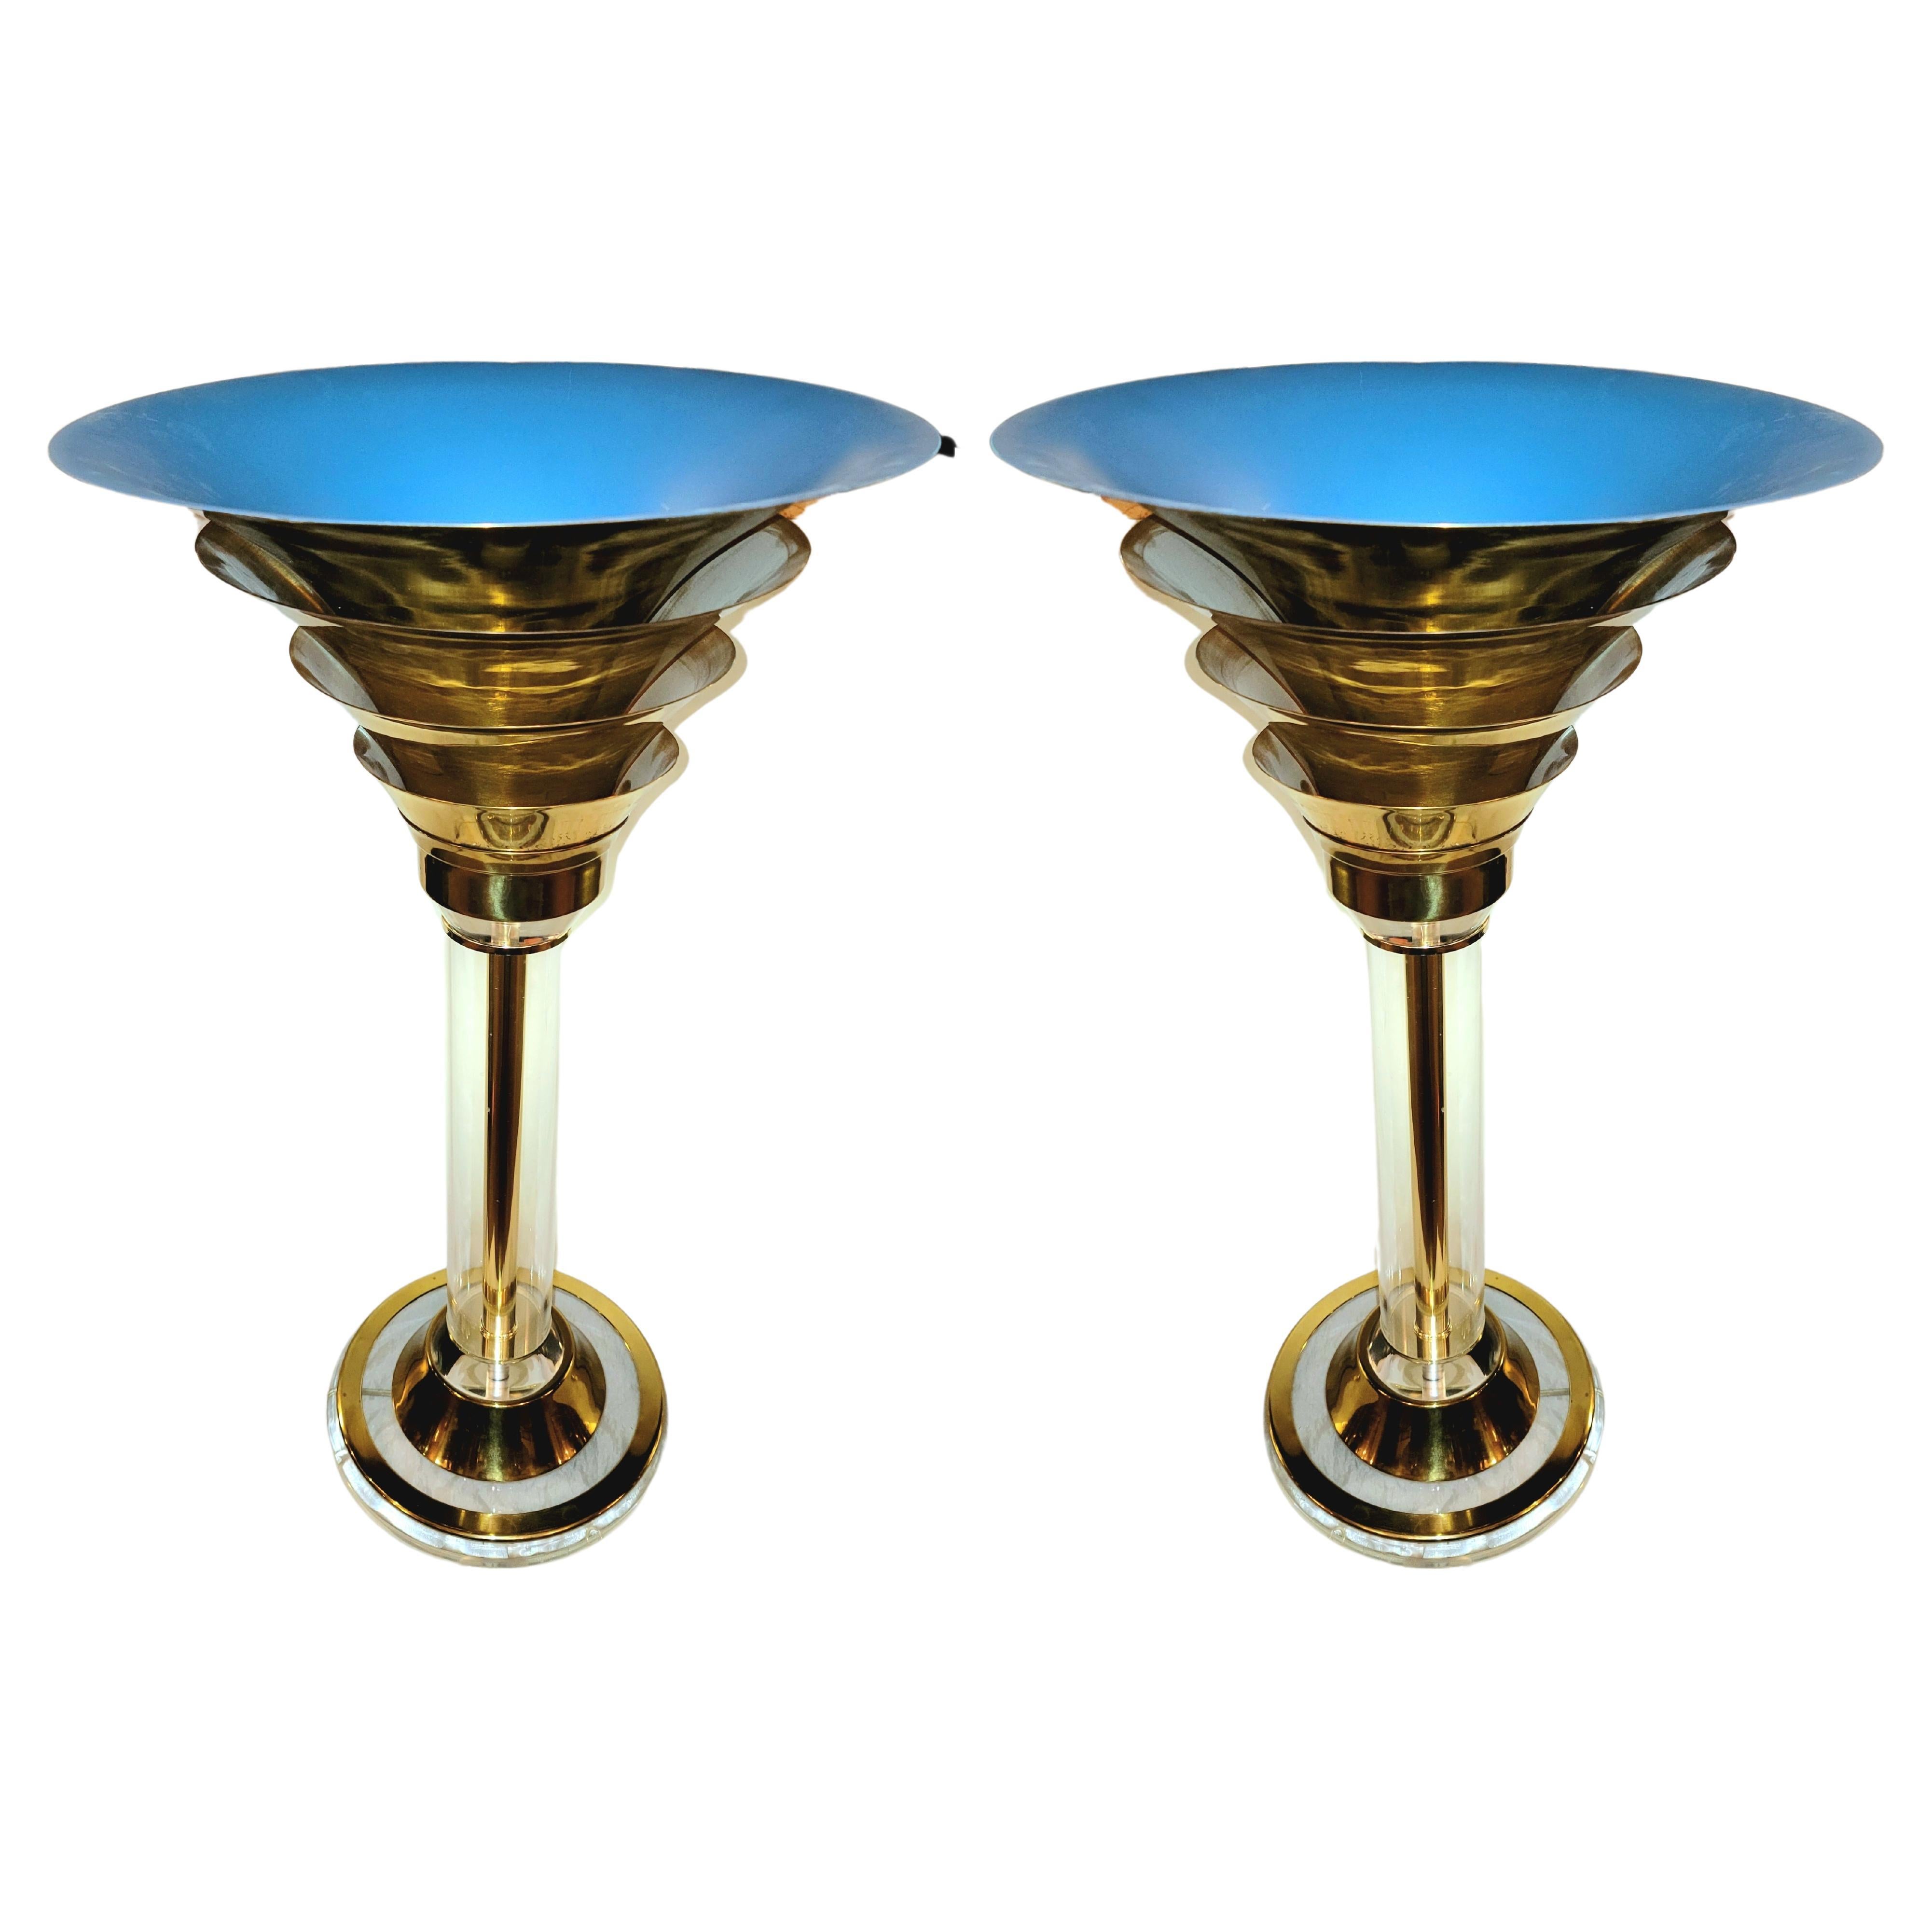 Brass and Luite Karl Springer Art Deco Table lamps The interrior of the stem is a brass that extends from the base upward to the diffusor styled top shades. Each layer allow for light to be dffused and escape at different angles. The Inner top